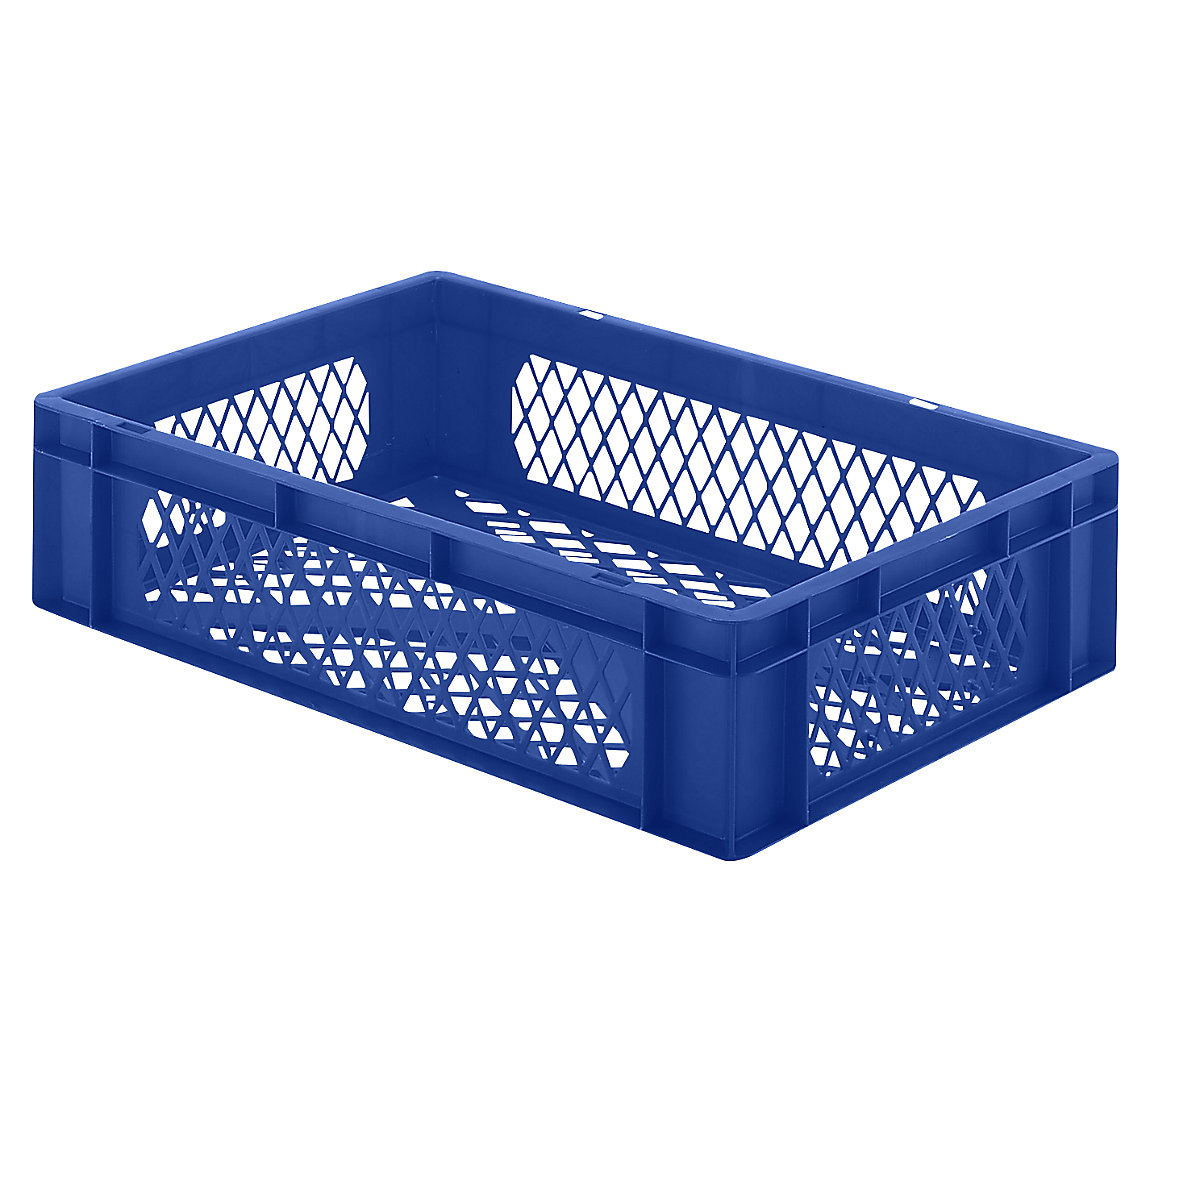 Euro stacking container, perforated walls and base, LxWxH 600 x 400 x 145 mm, blue, pack of 5